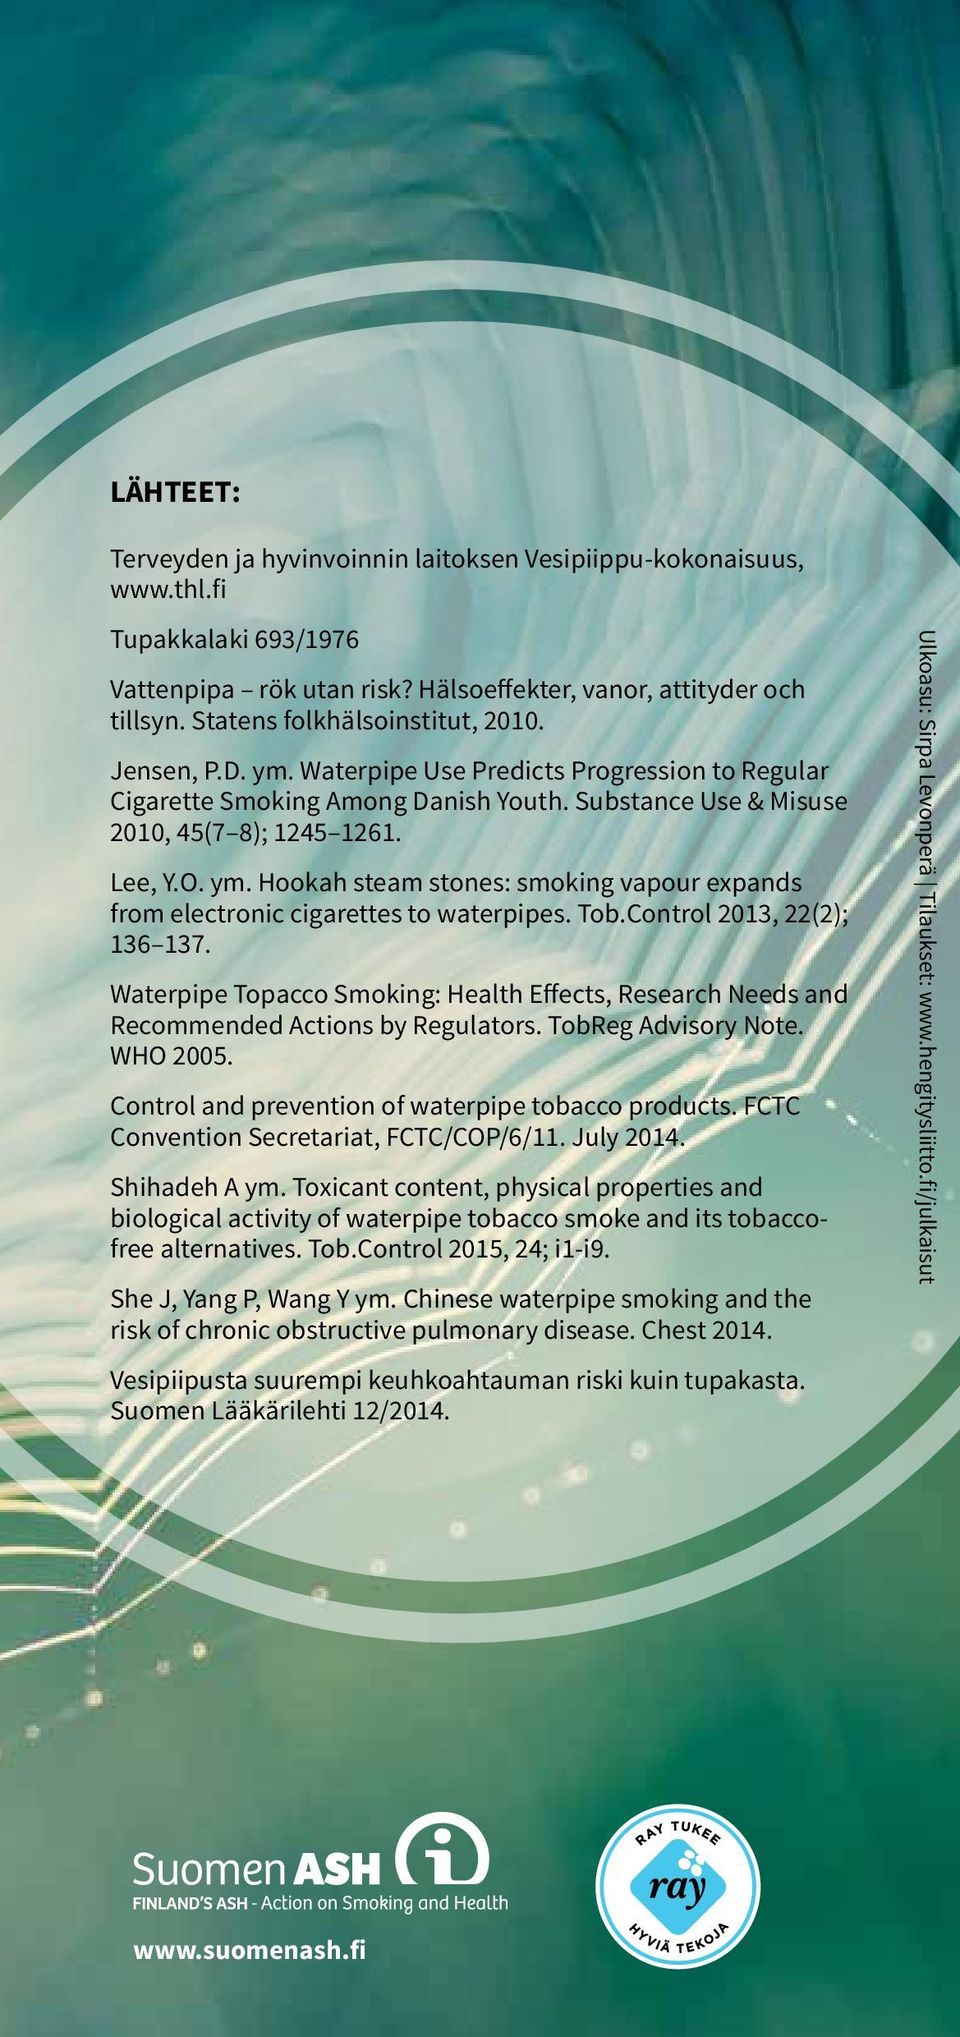 Tob.Control 2013, 22(2); 136 137. Waterpipe Topacco Smoking: Health Effects, Research Needs and Recommended Actions by Regulators. TobReg Advisory Note. WHO 2005.